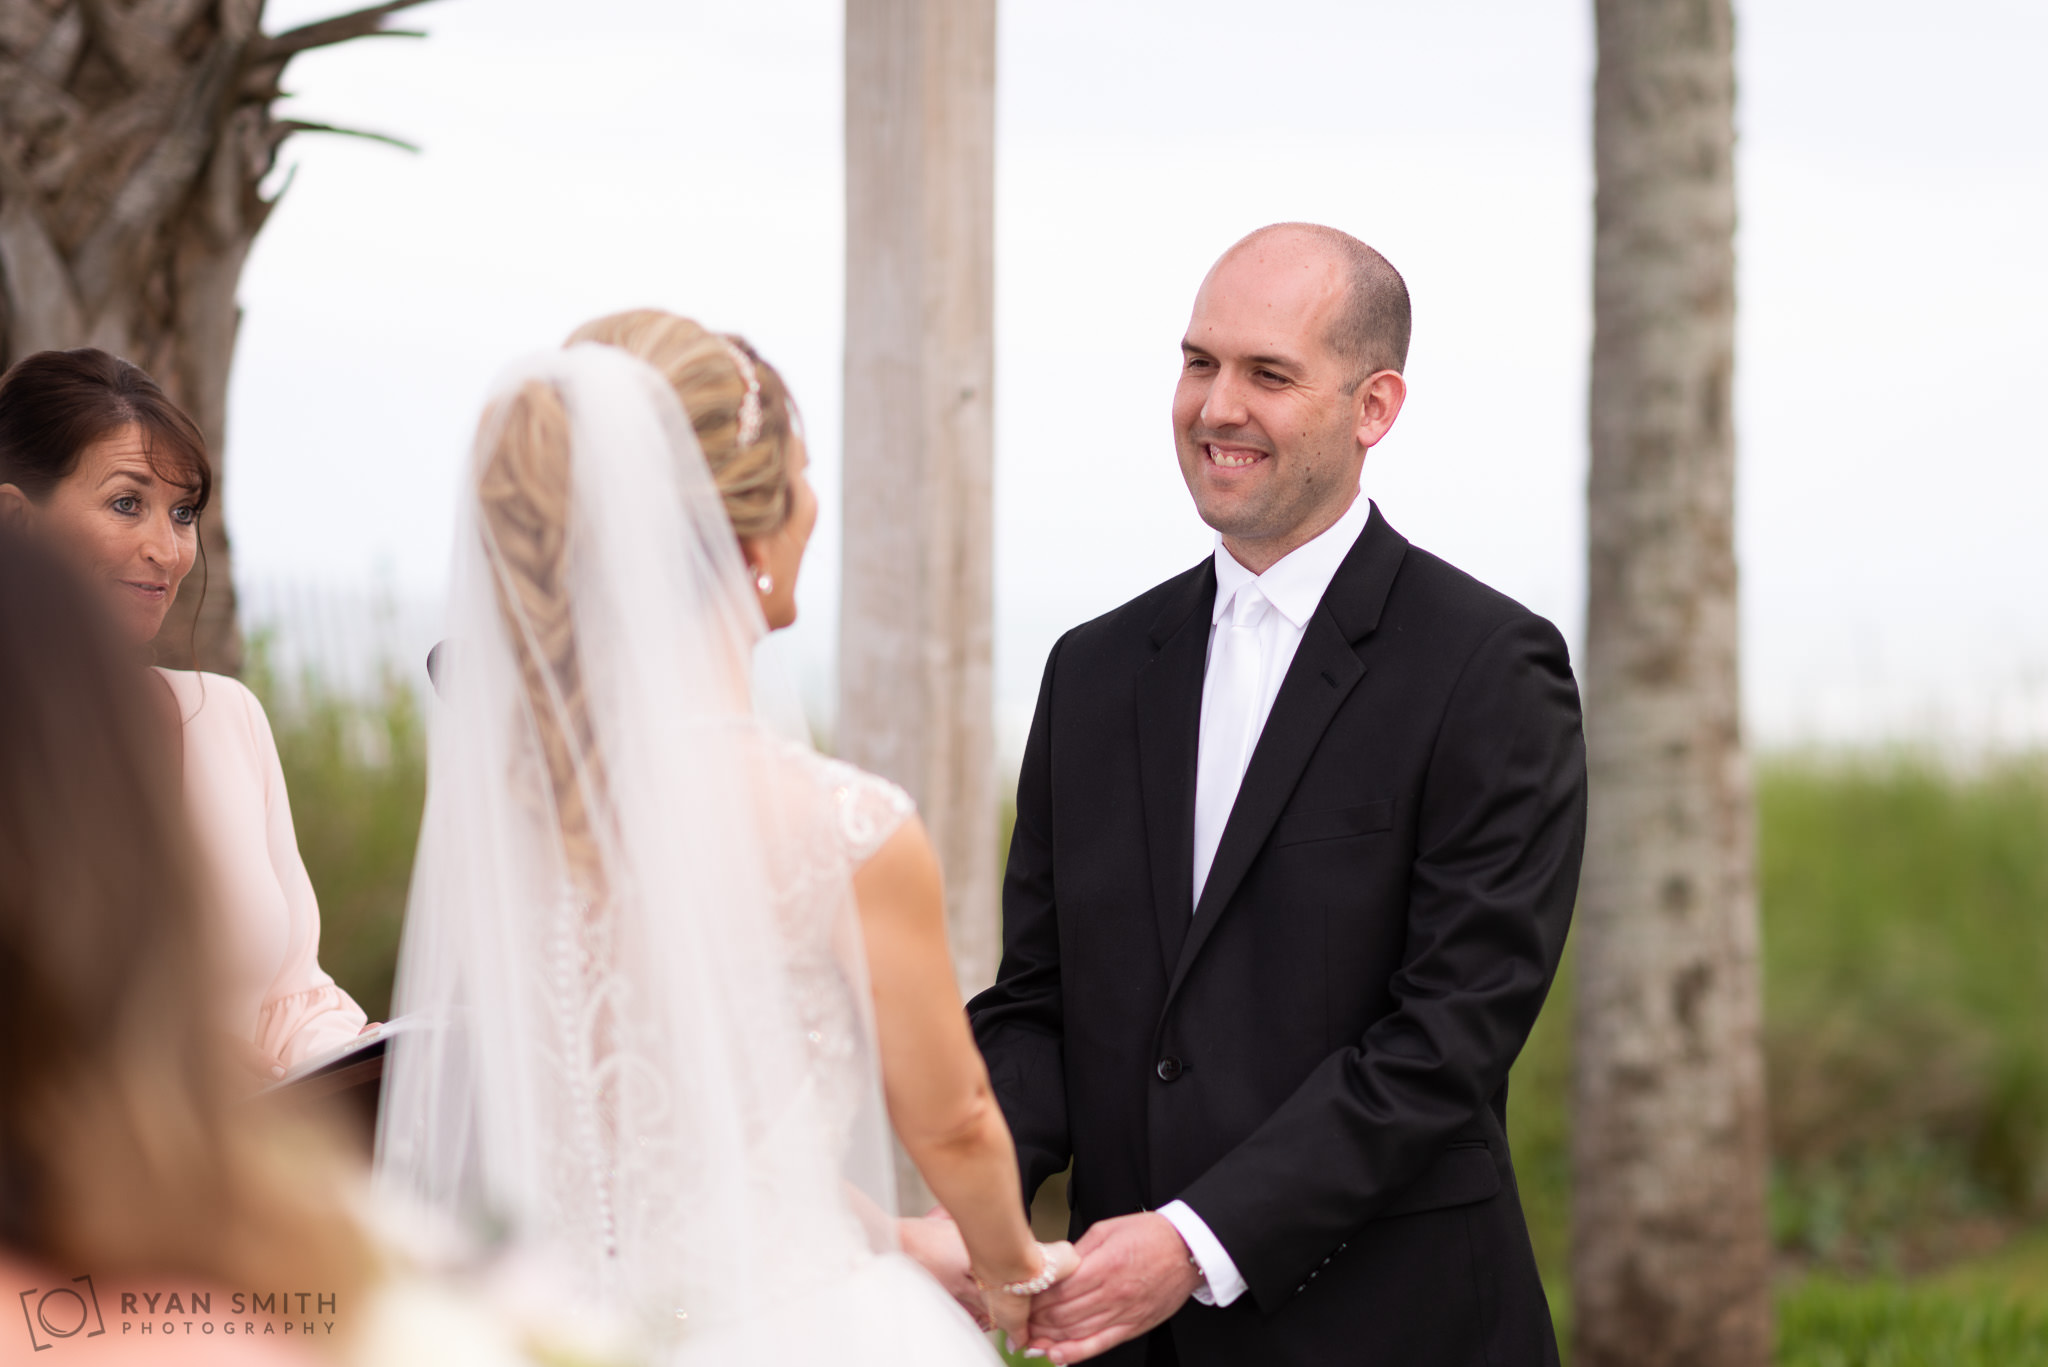 Groom smiling at bride during ceremony